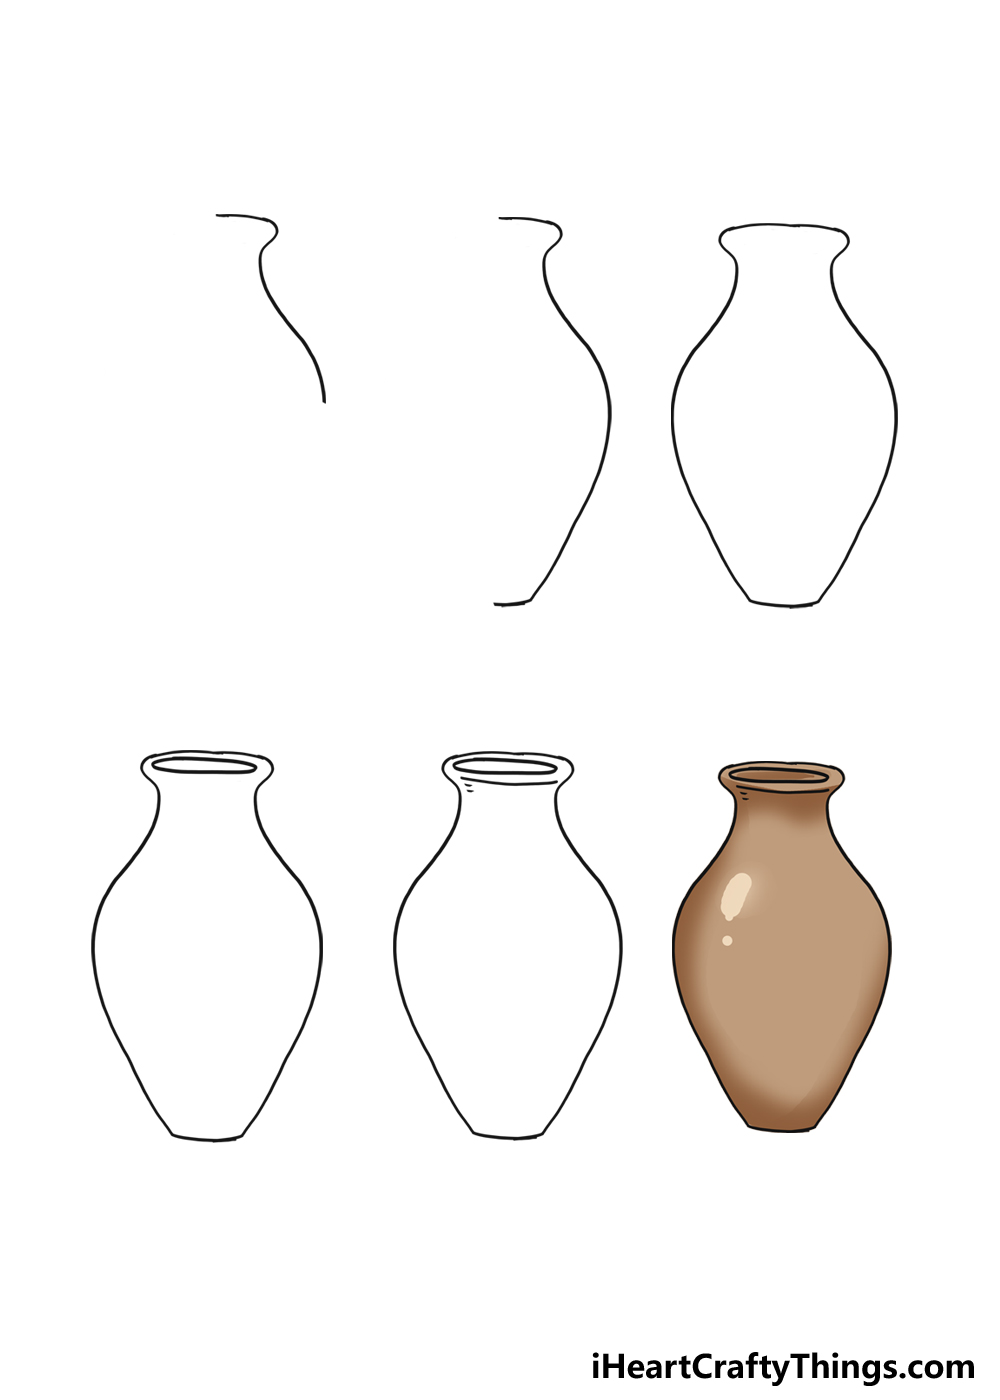 How to Draw A Flower Vase